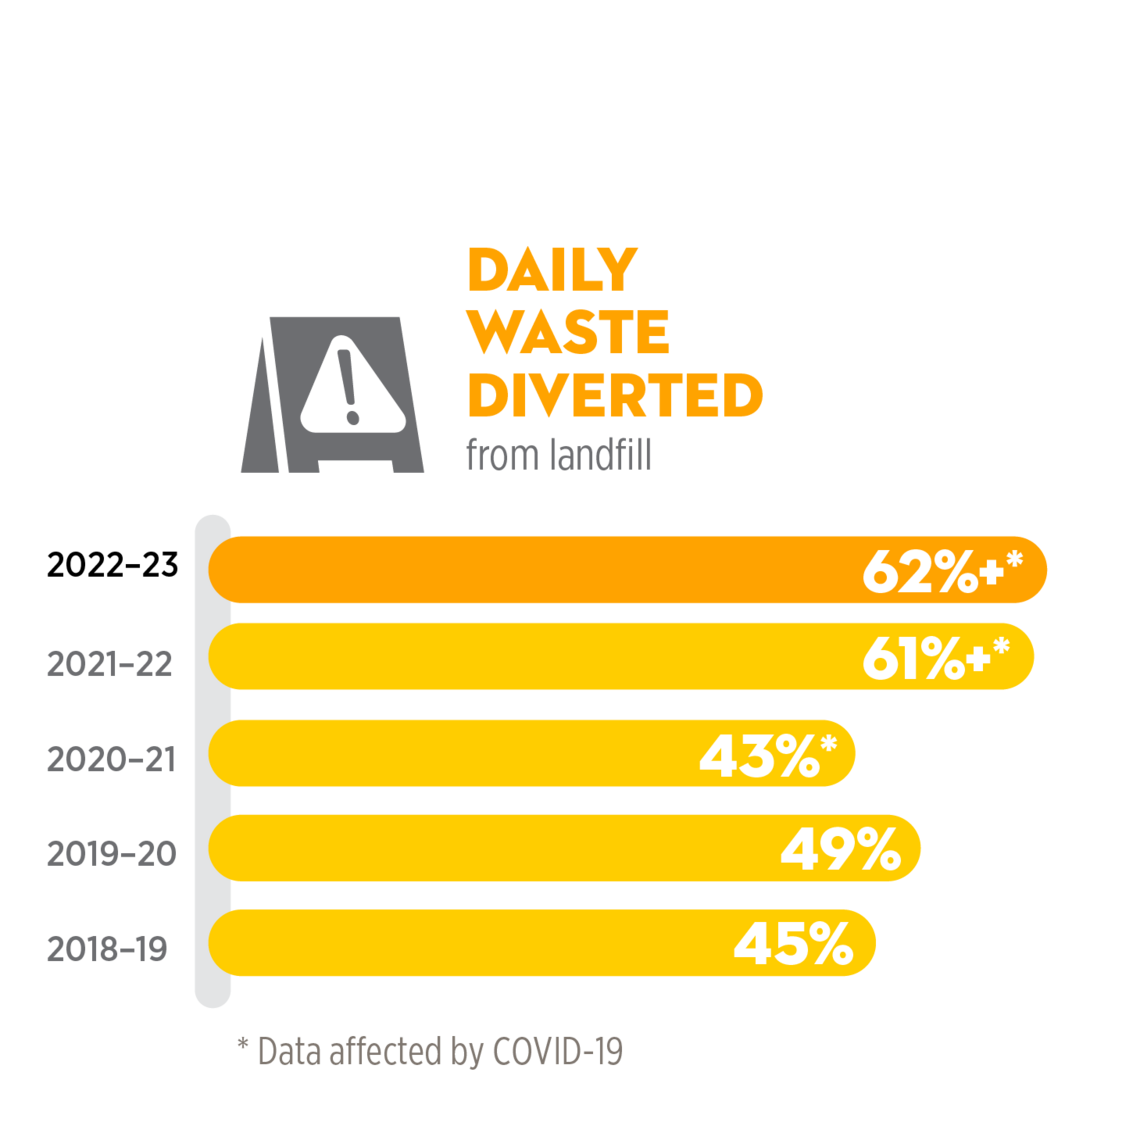 62% daily waste diverted in 2022-23